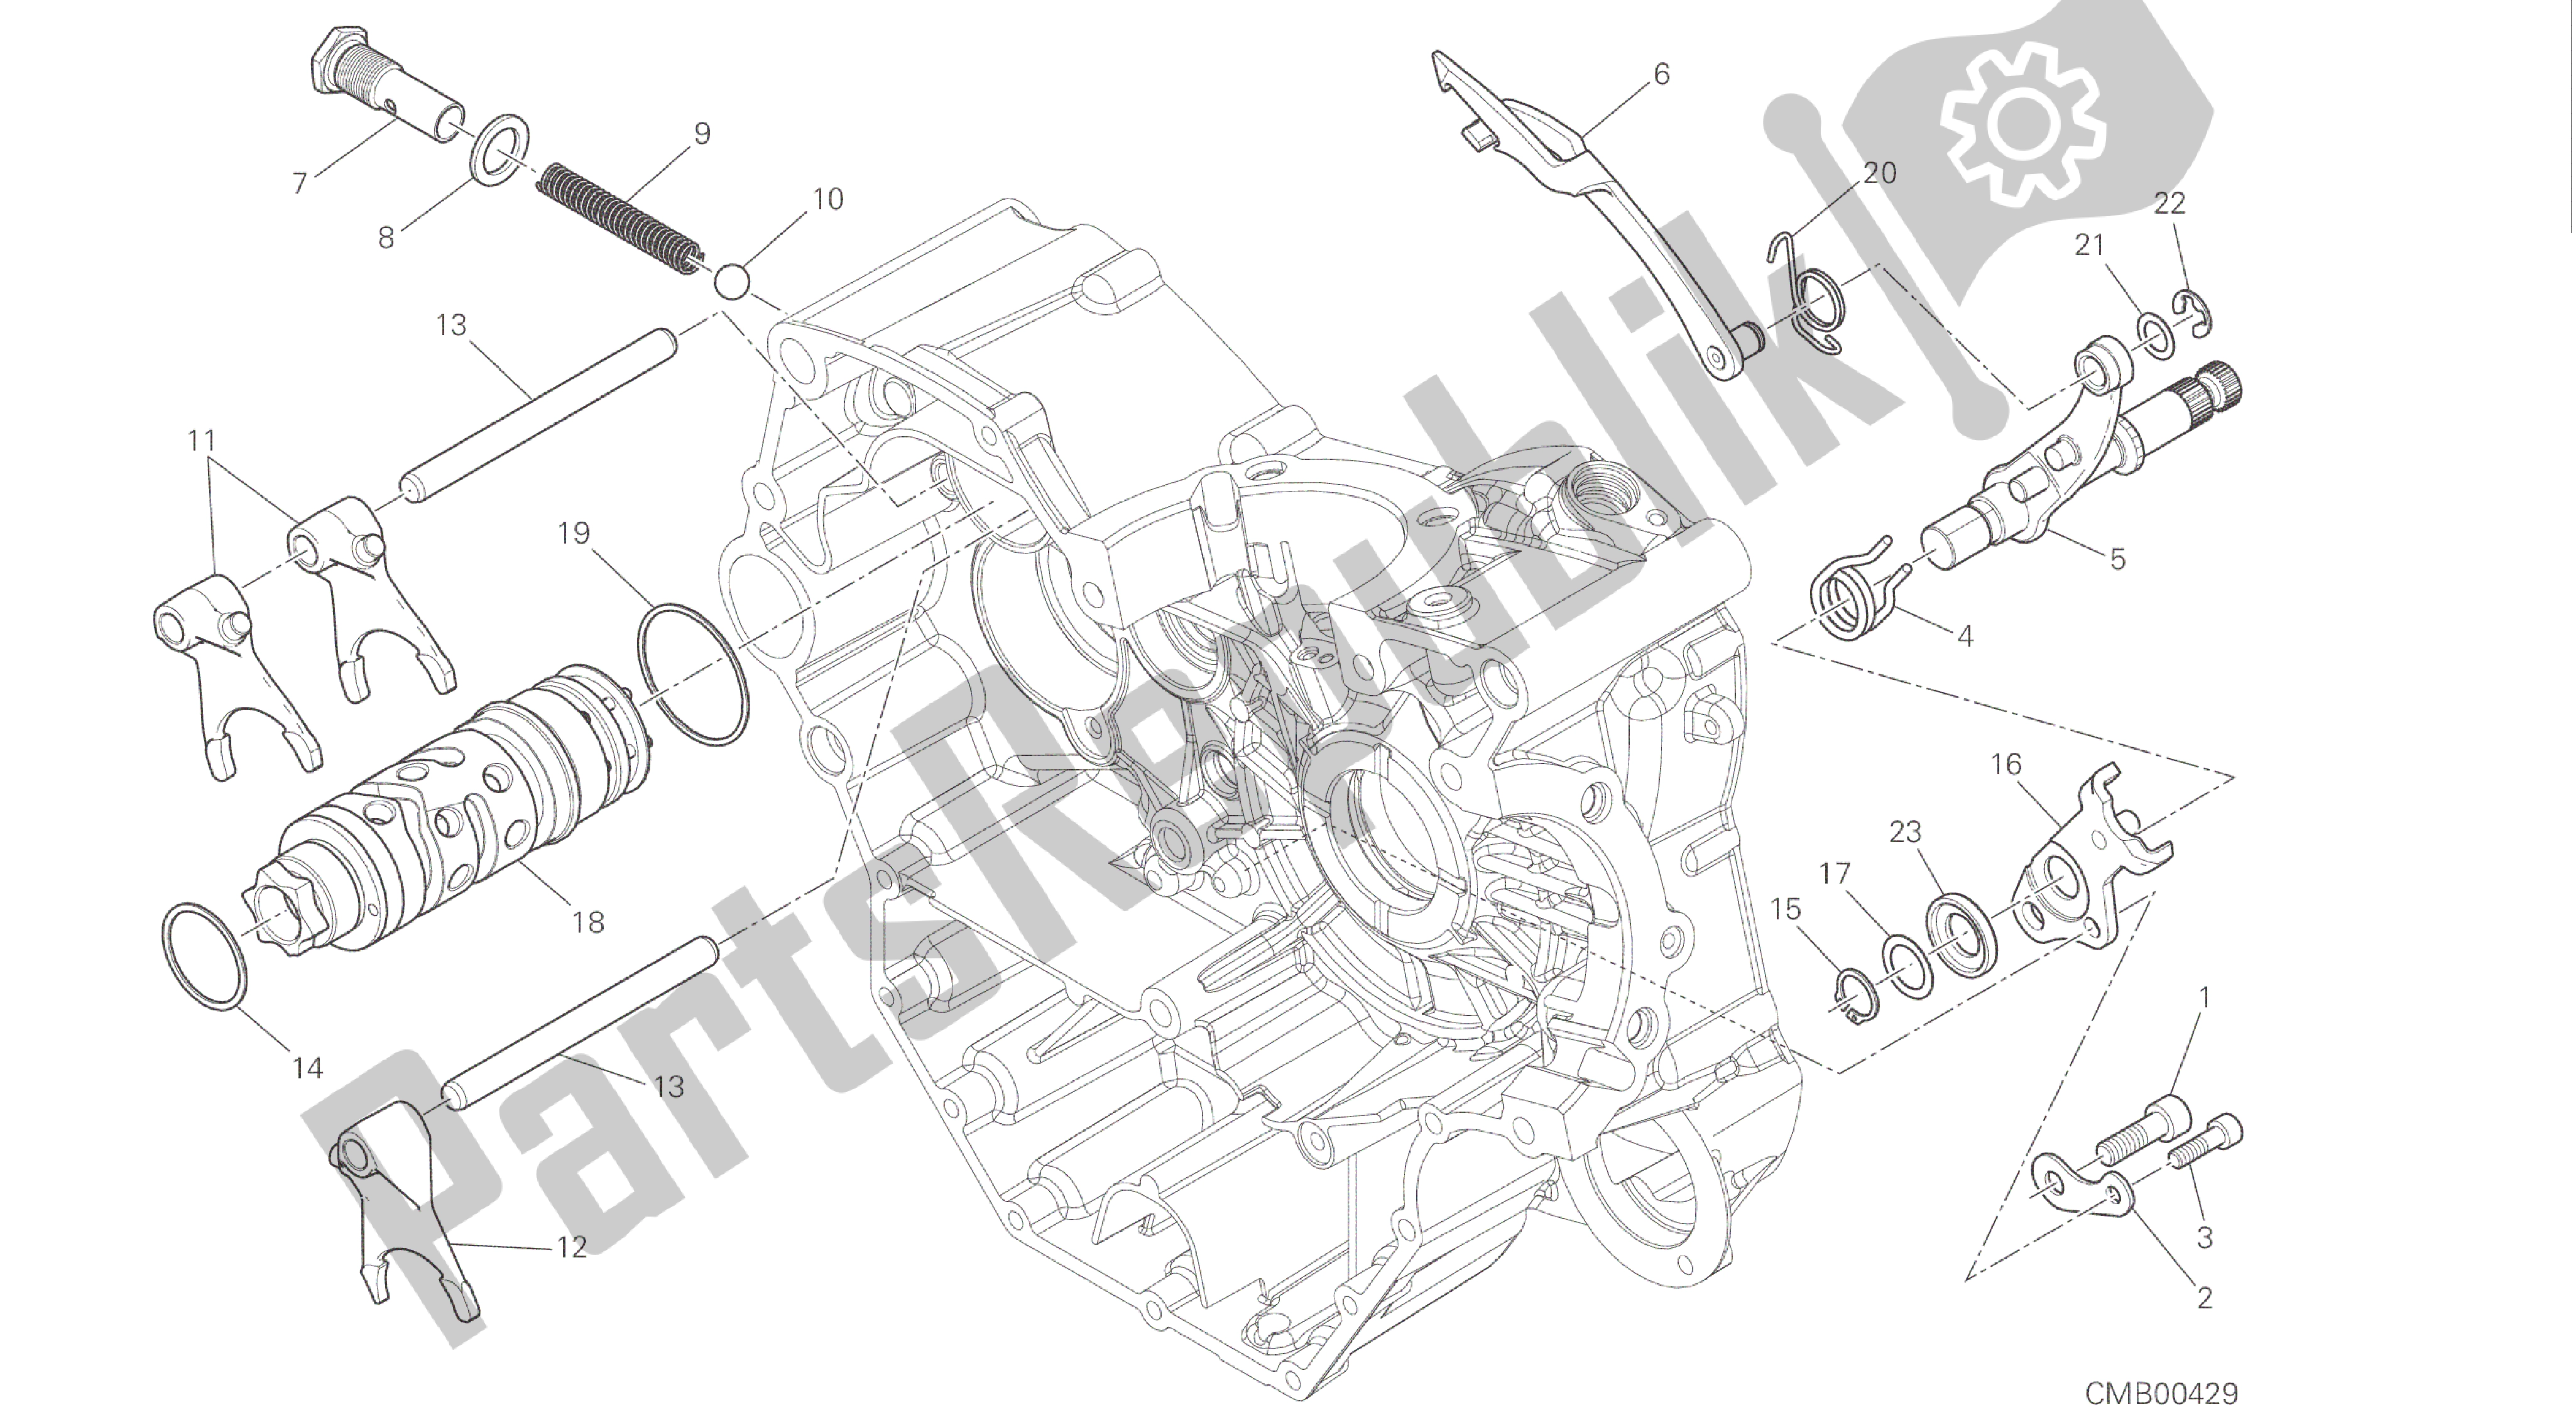 All parts for the Drawing 002 - Shift Cam - Fork [mod:hym-sp;xst:aus,eur,fra,jap]group Engine of the Ducati Hypermotard SP 821 2015